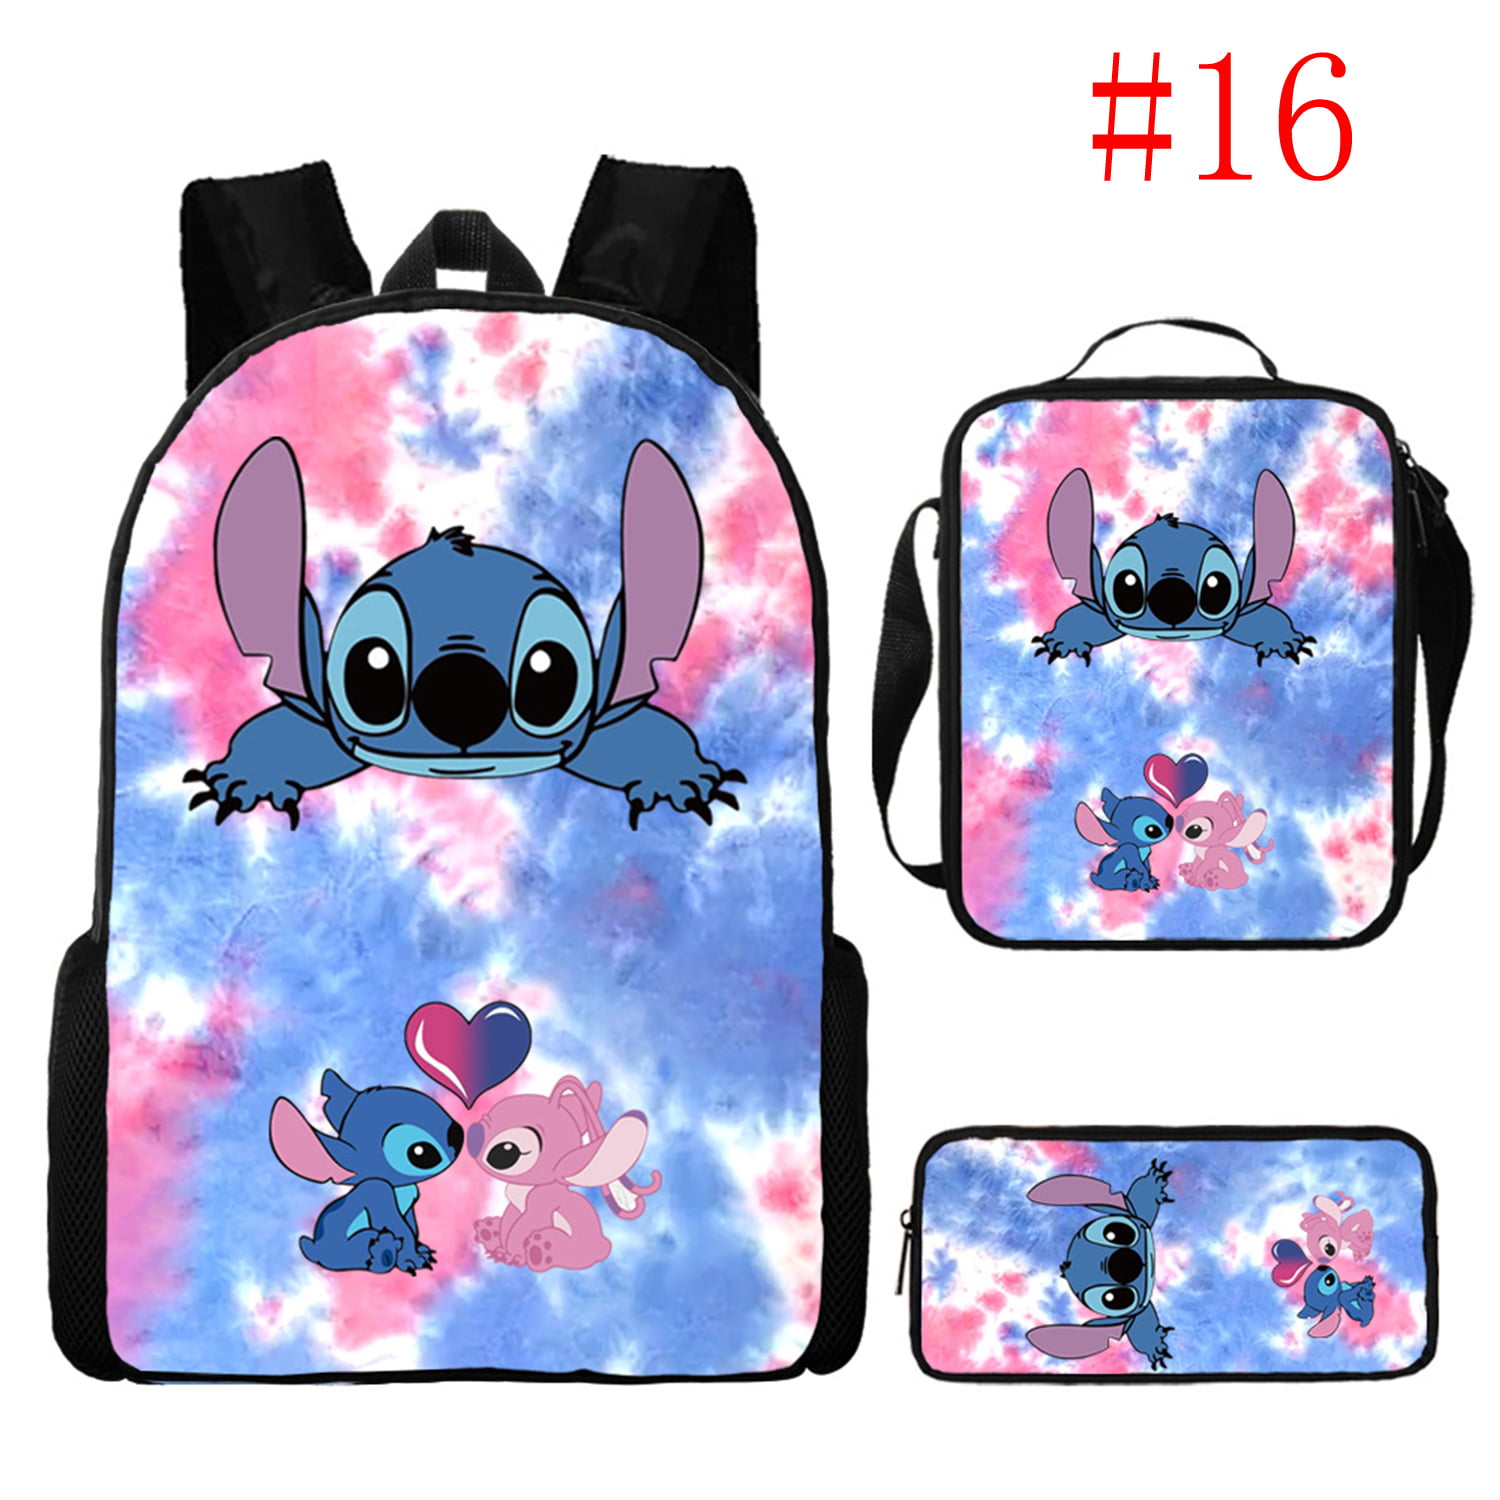 Fashion Stitch Kids Backpack School Bags Casual Laptop Travel Backpacks for  Boys Girl Children's Day Back to School Christmas Gift (#4)